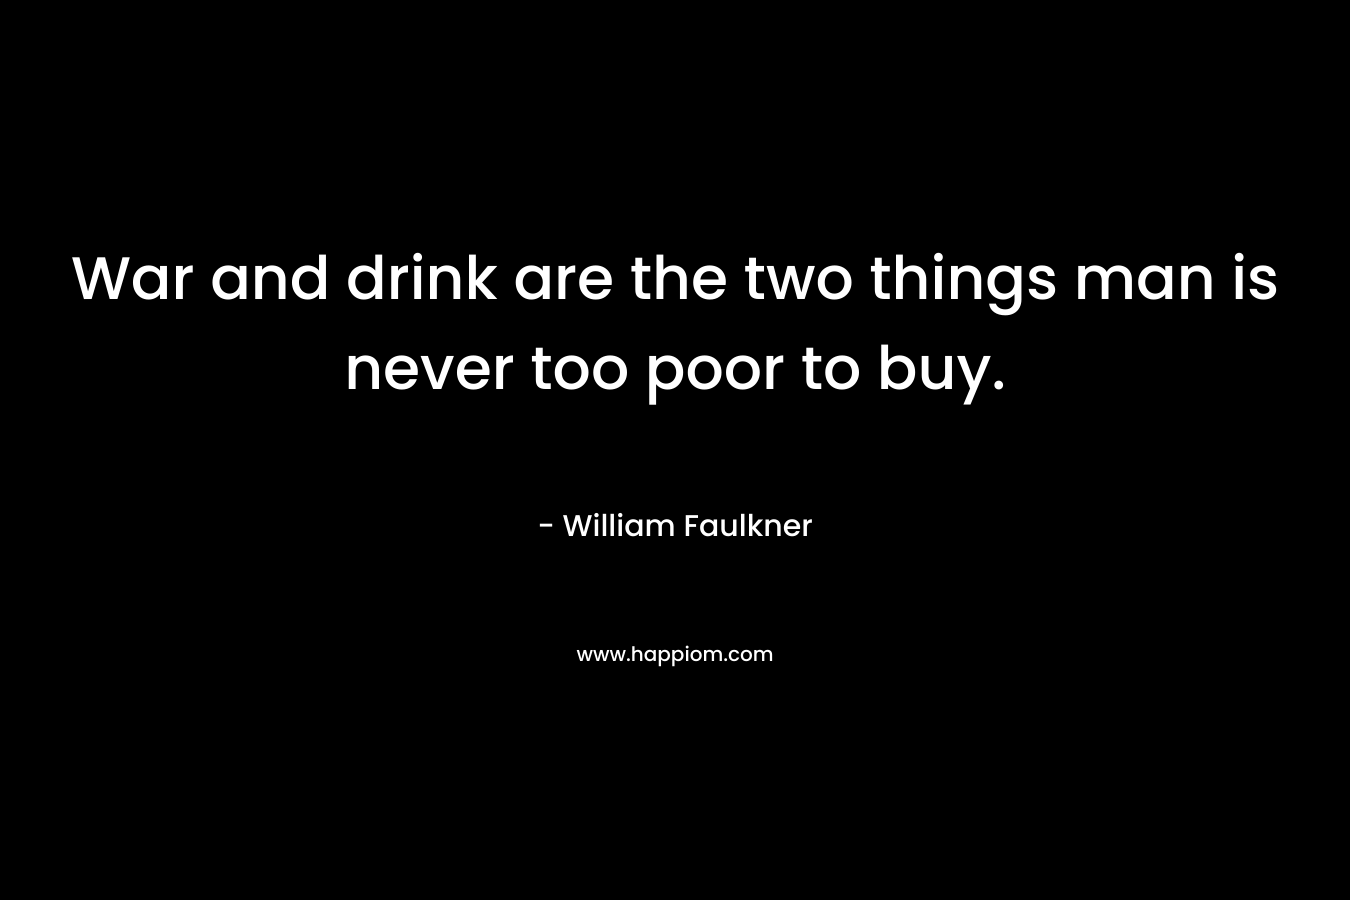 War and drink are the two things man is never too poor to buy.